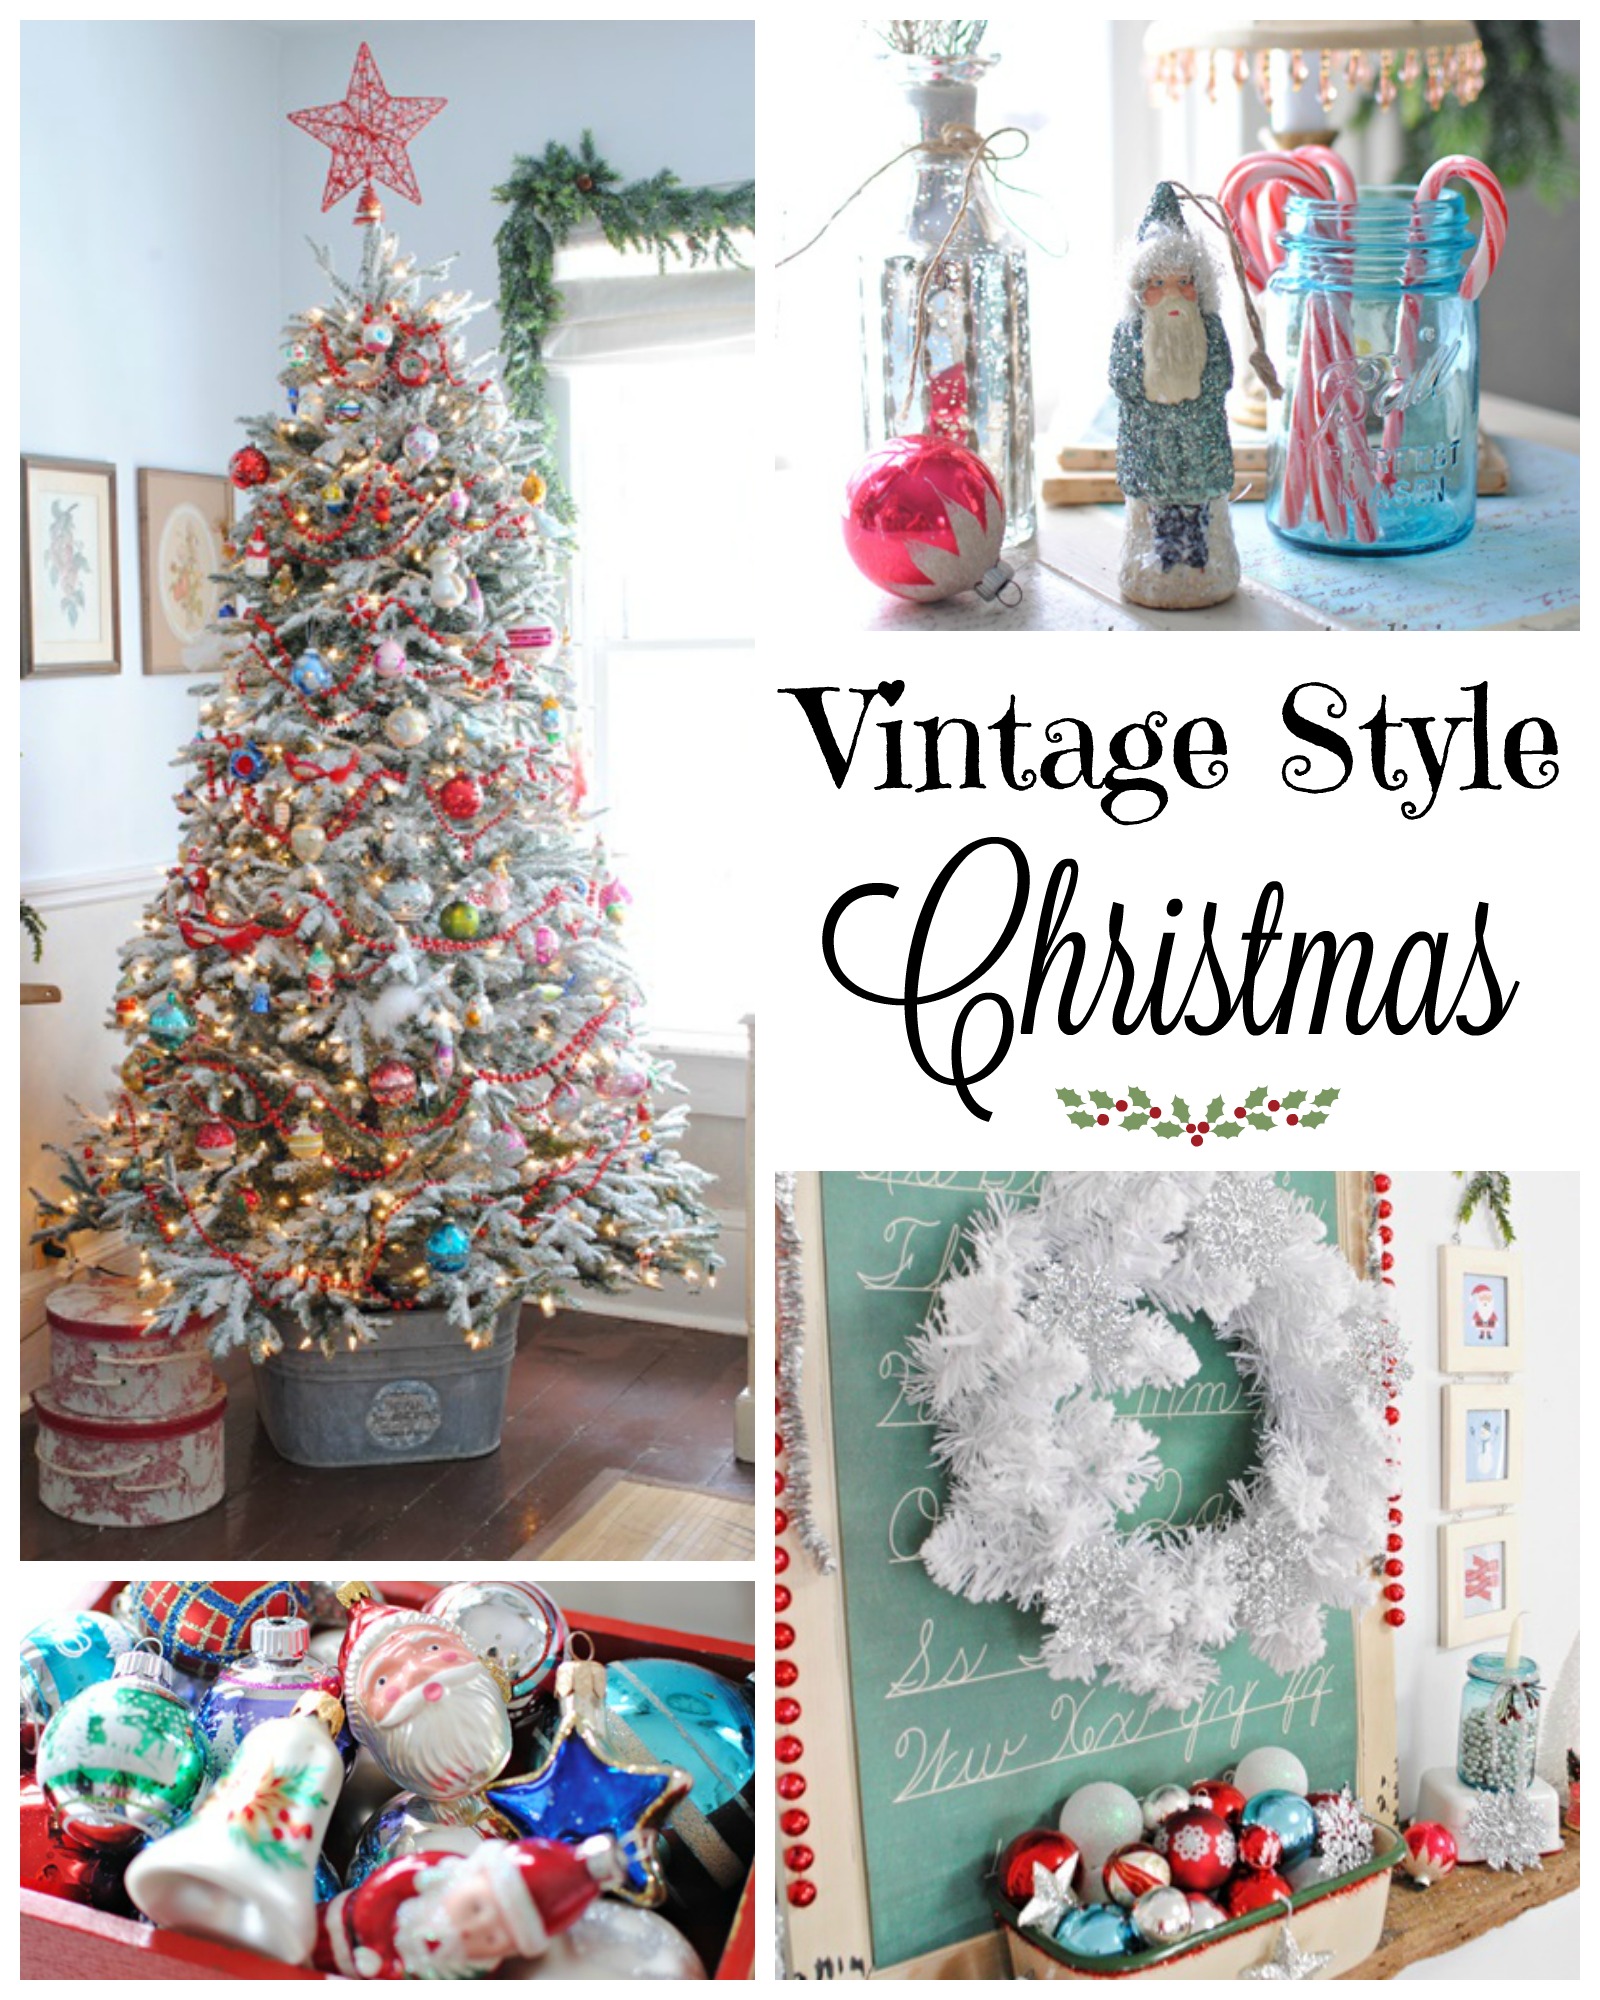 Vintage Christmas Shopping Guide - Town & Country Living